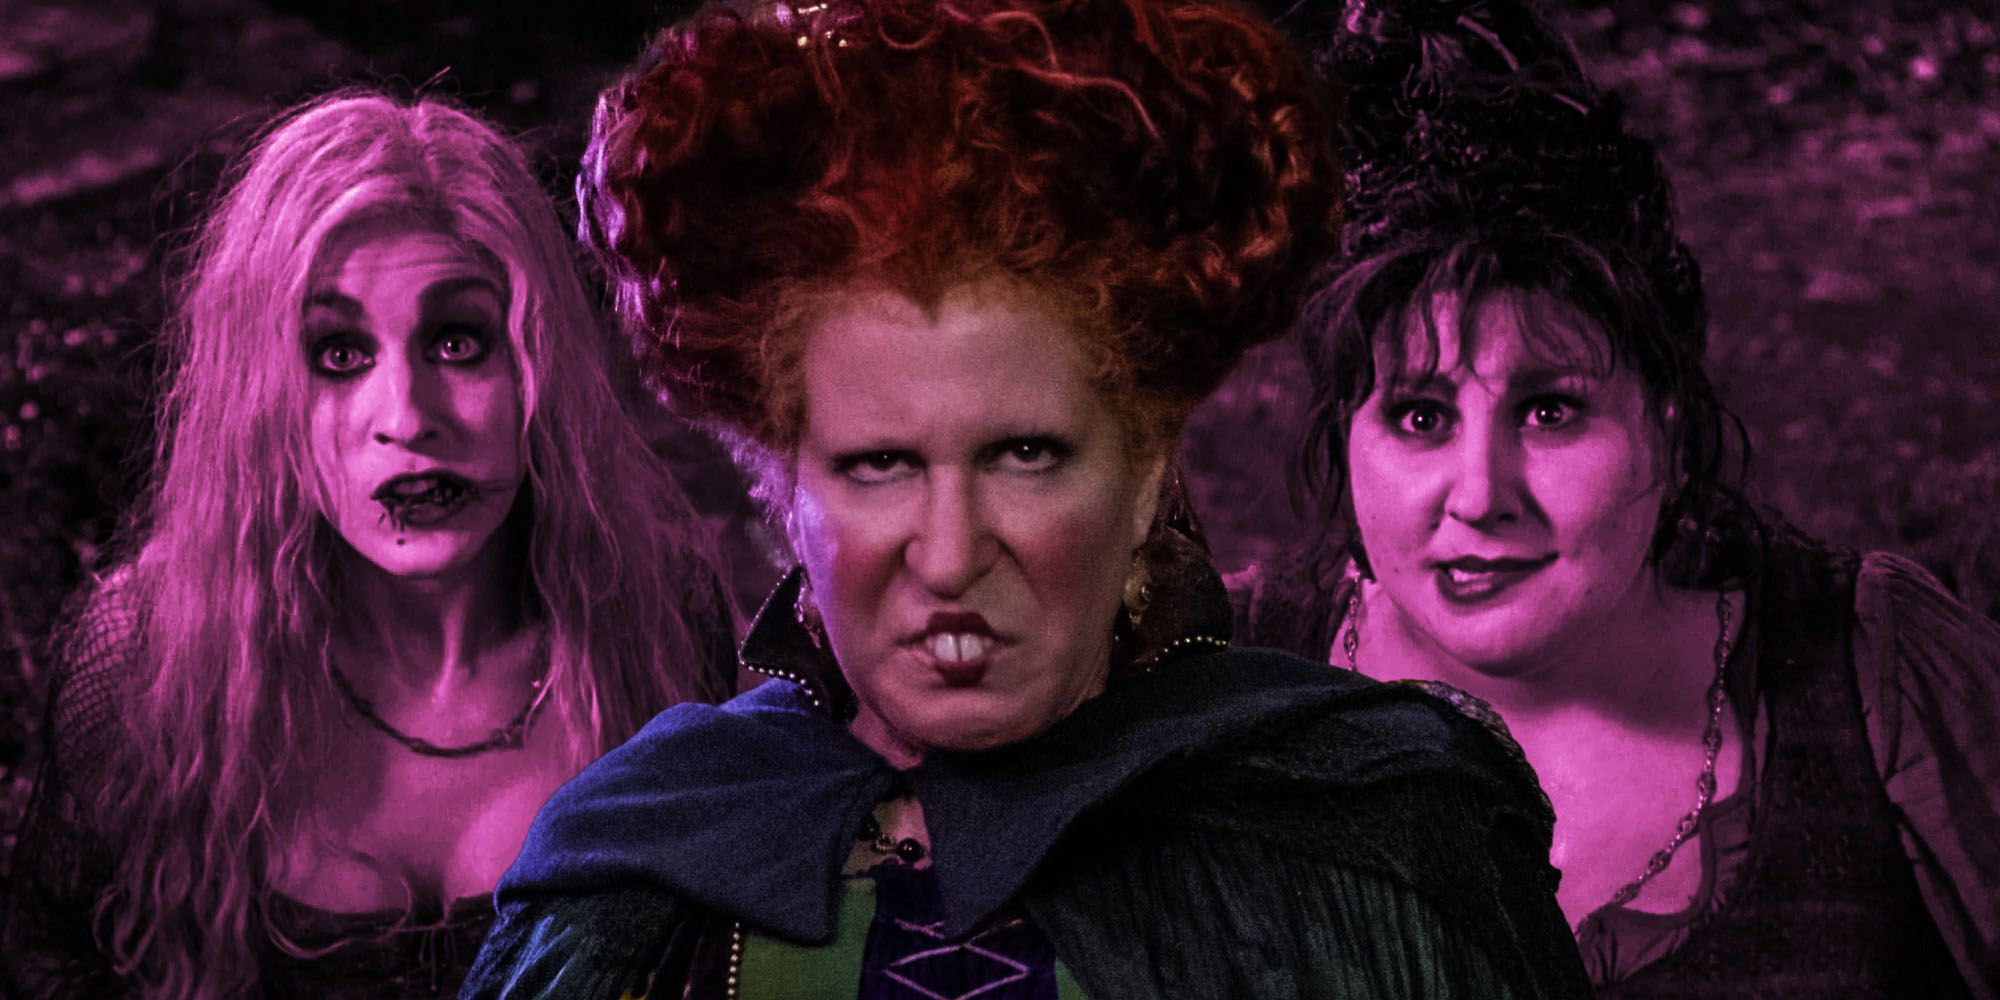 Did You Know: The Sanderson Sisters Were Based on REAL People